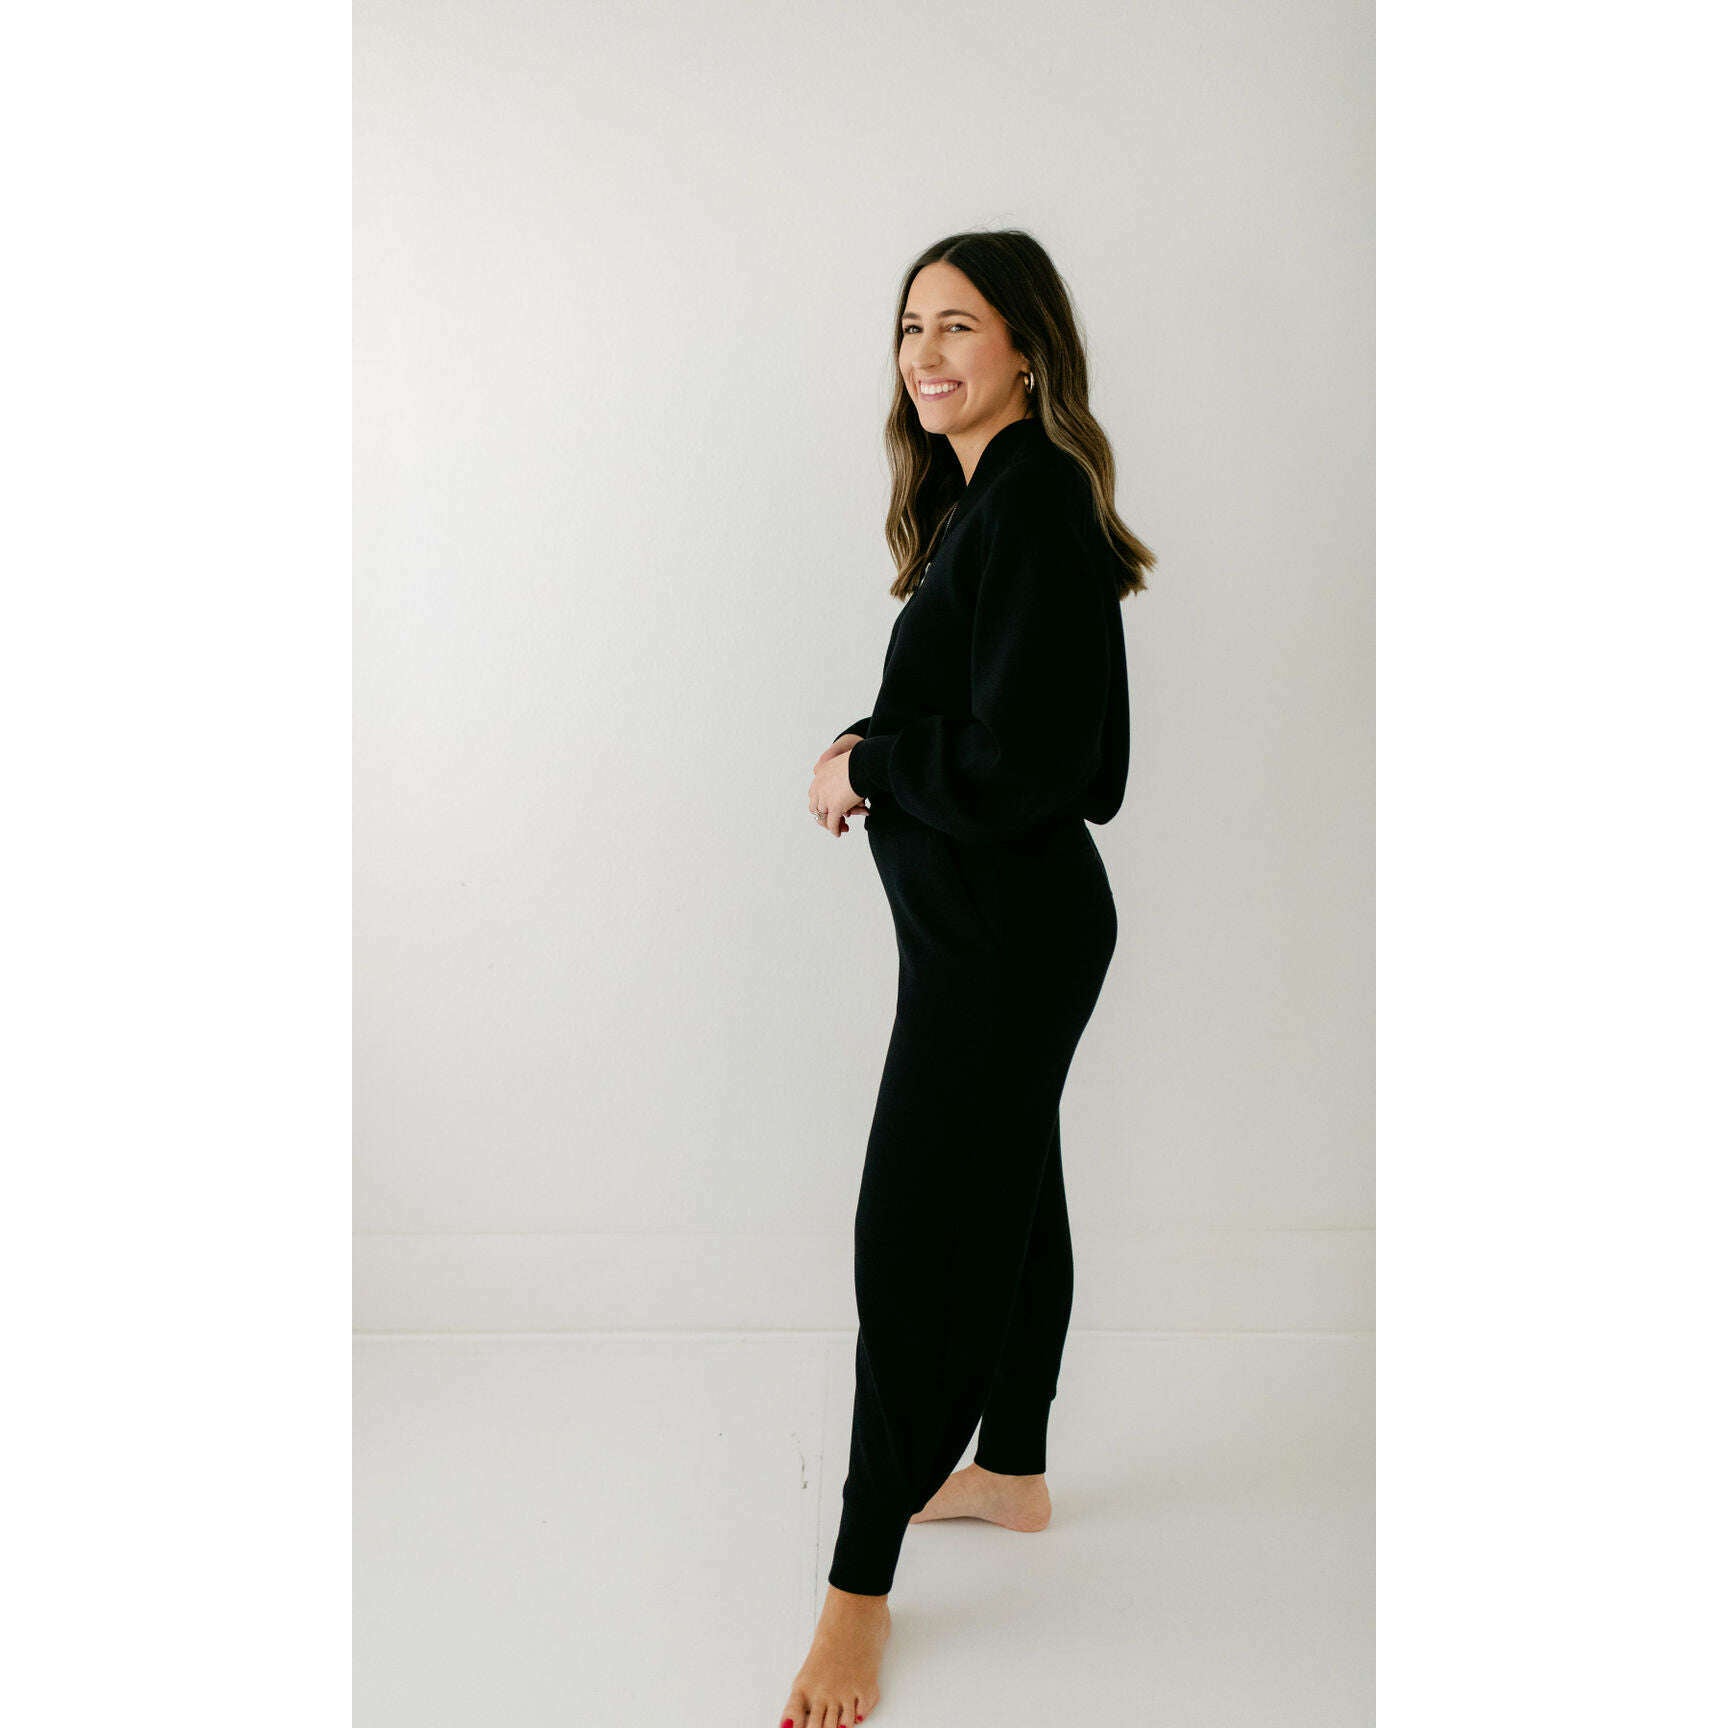 8.28 Boutique:Varley,Varley Relaxed Pant in 27.5 in Black,Bottoms